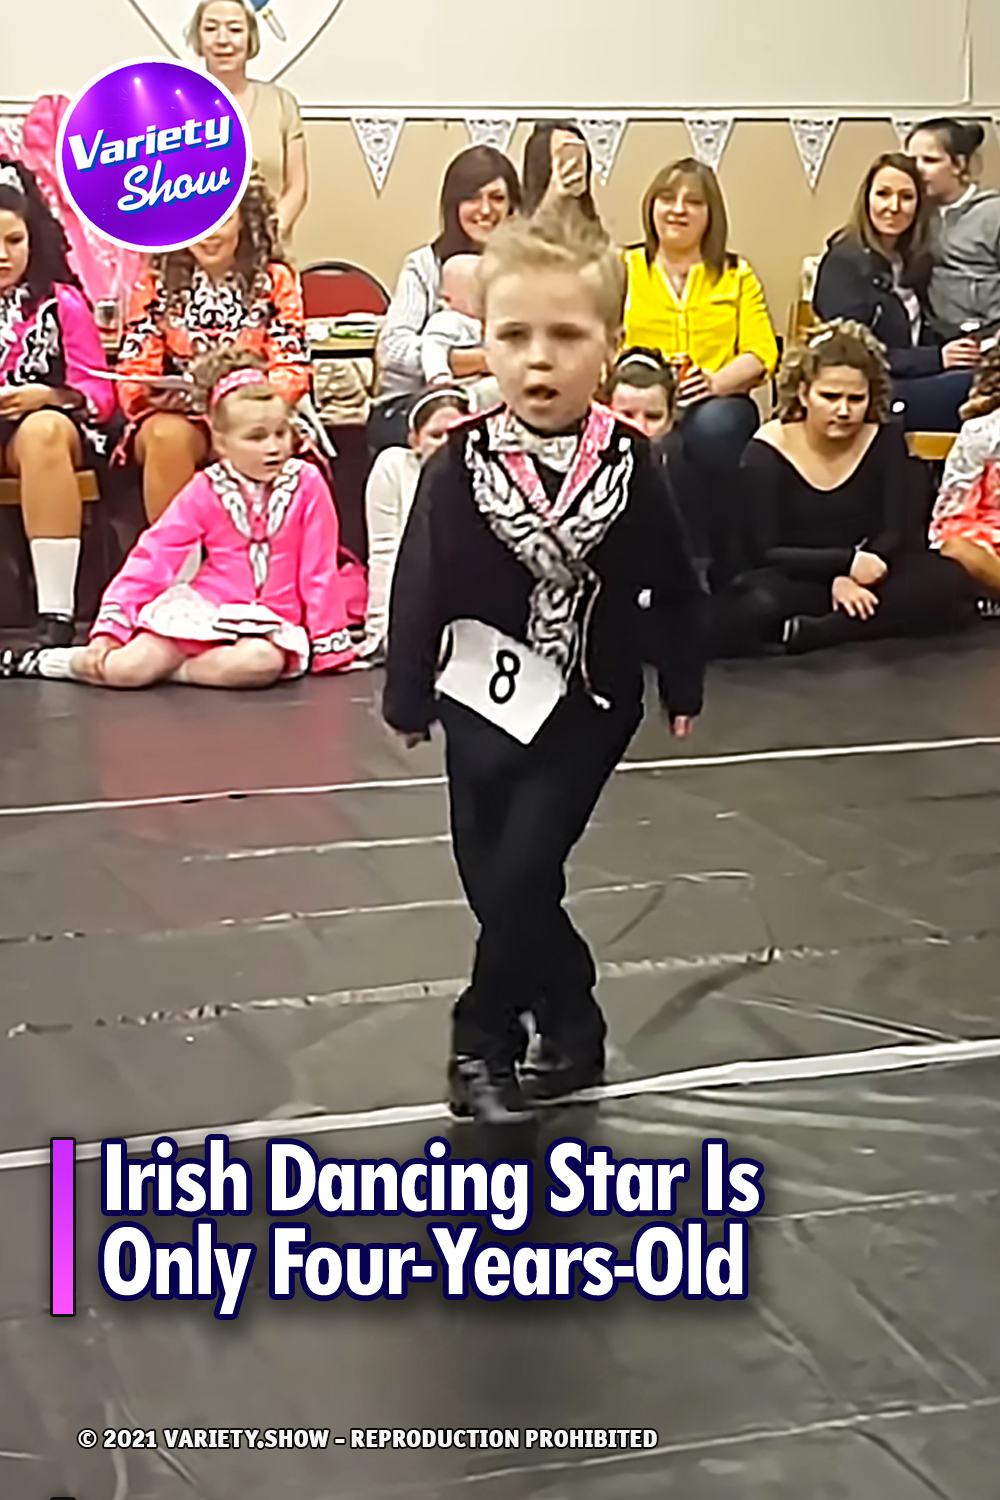 Irish Dancing Star Is Only Four-Years-Old